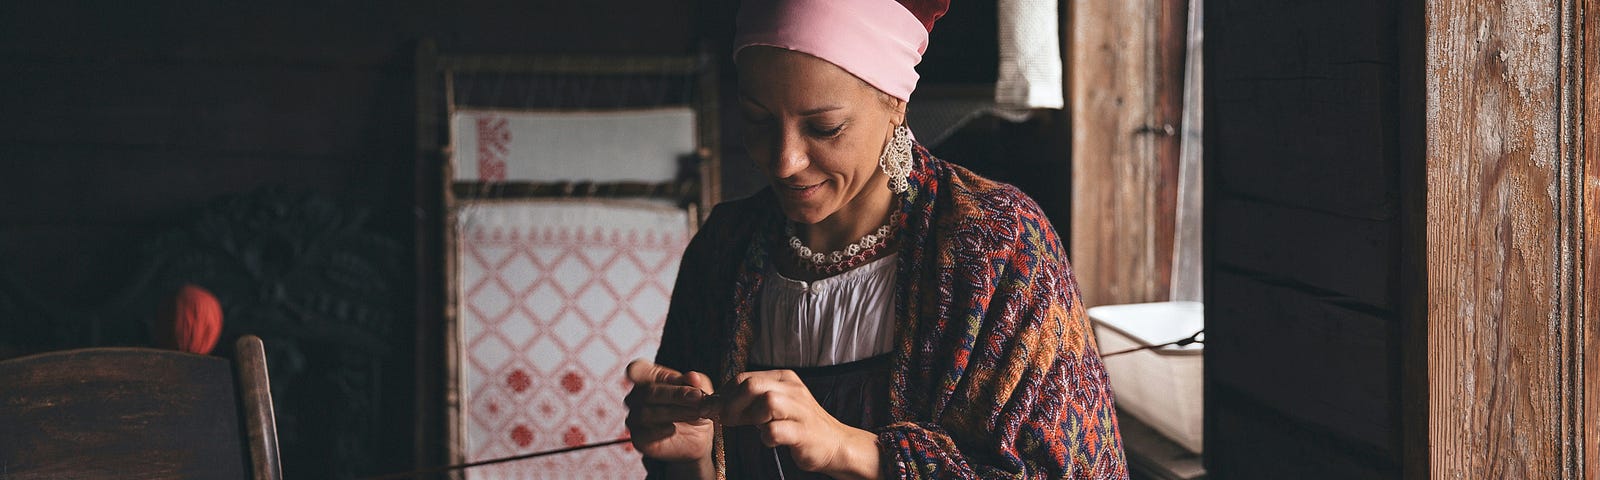 A jeweler making beaded necklaces by hand.